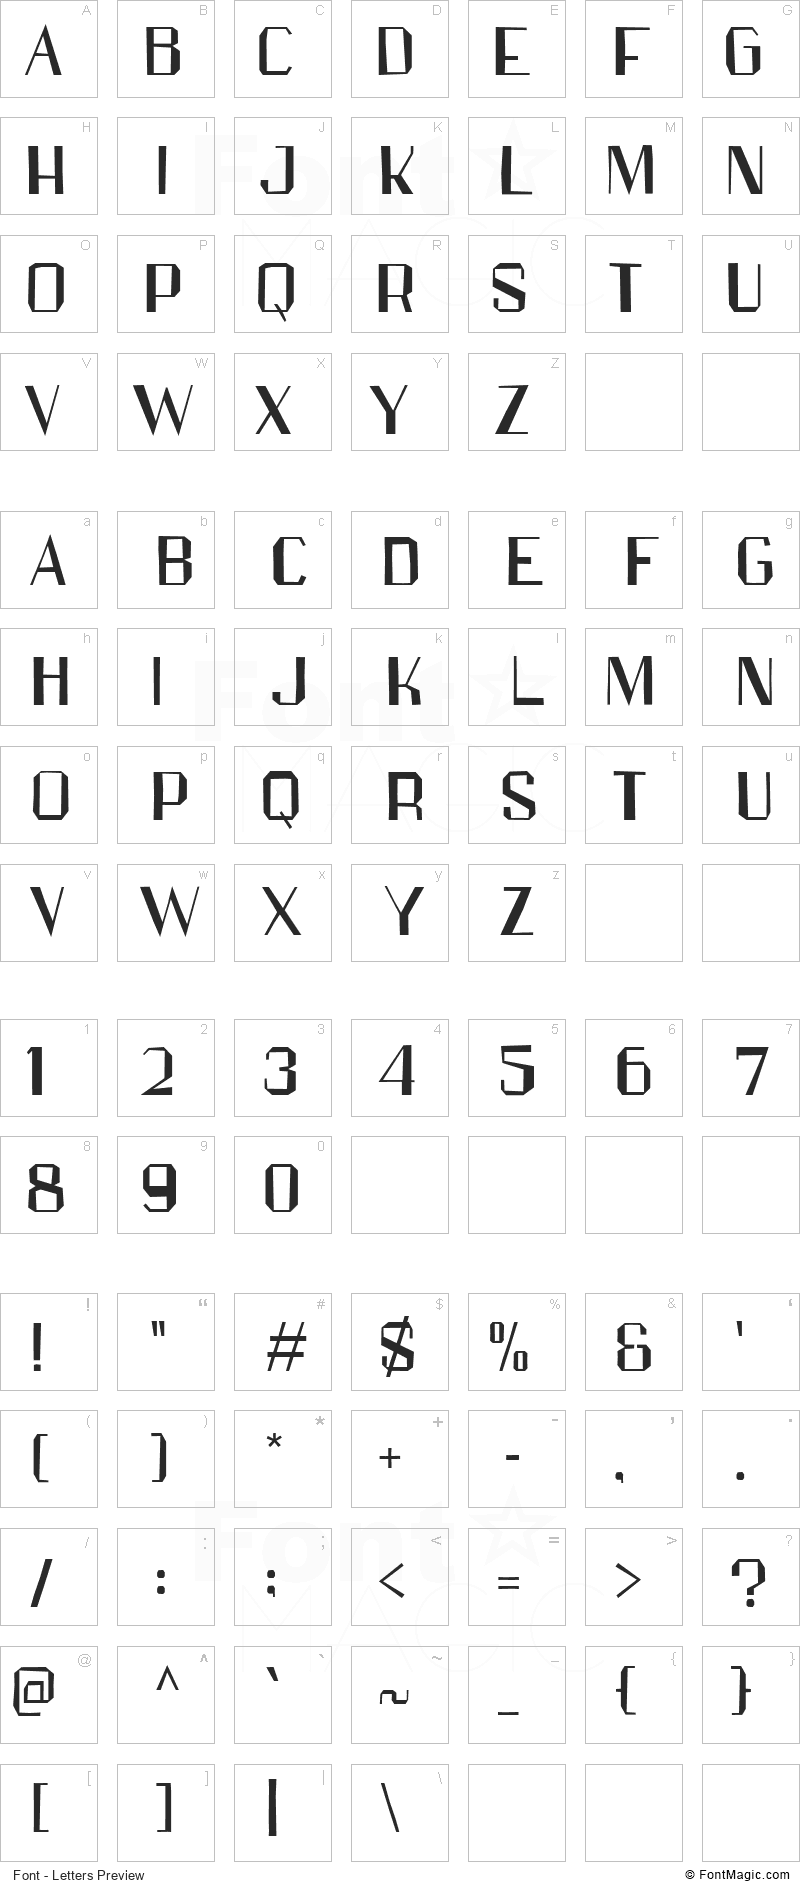 Papercutz Font - All Latters Preview Chart